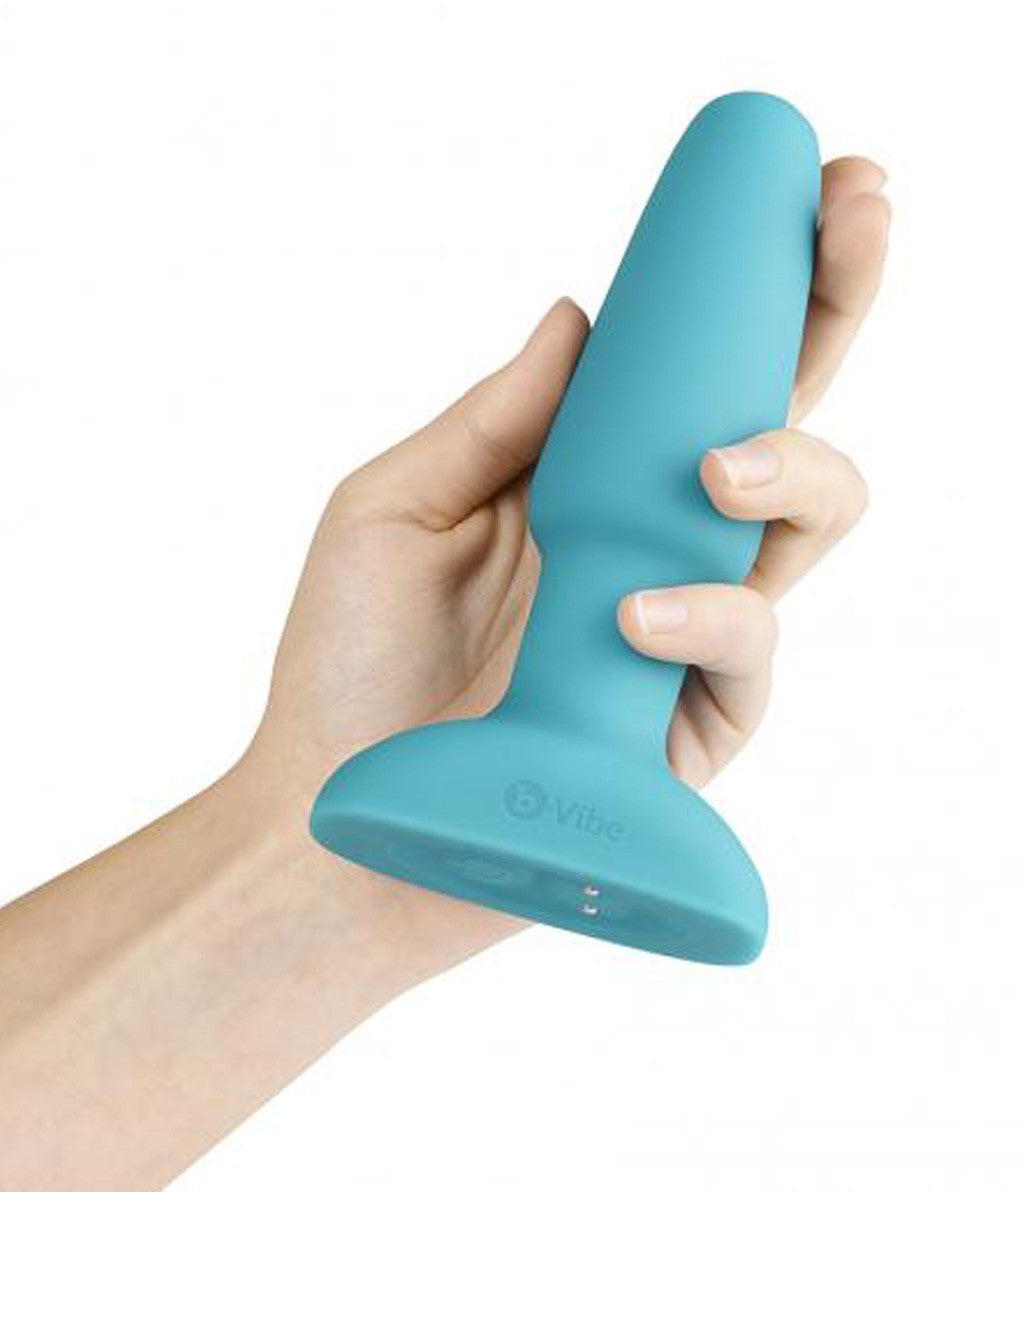 B-Vibe Rimming Plug- Turquoise- In hand